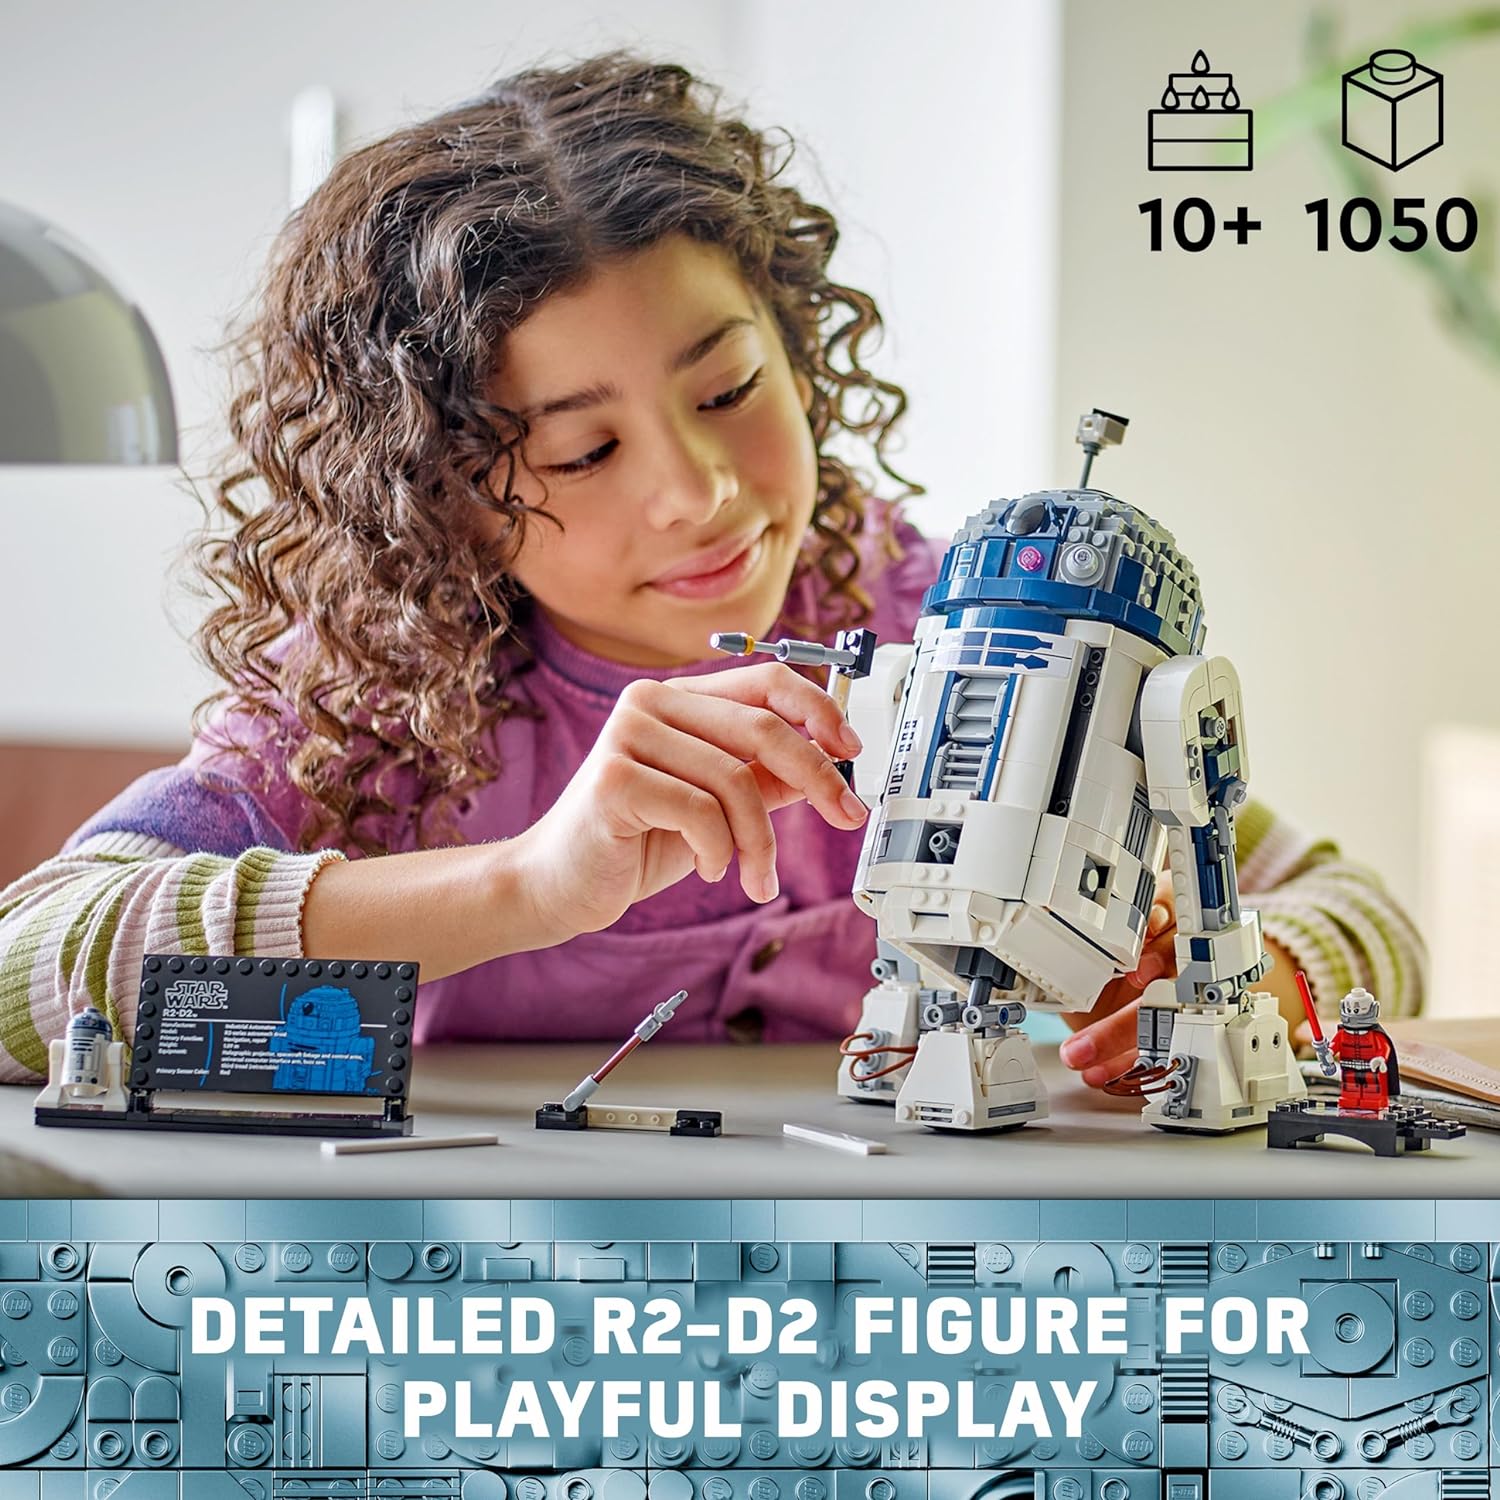 LEGO 75379 Star Wars R2-D2 Brick Built Droid Figure, Collectible Star Wars Room Décor with Exclusive 25th Anniversary Minifigure Darth Malak, Creative Play Gift.